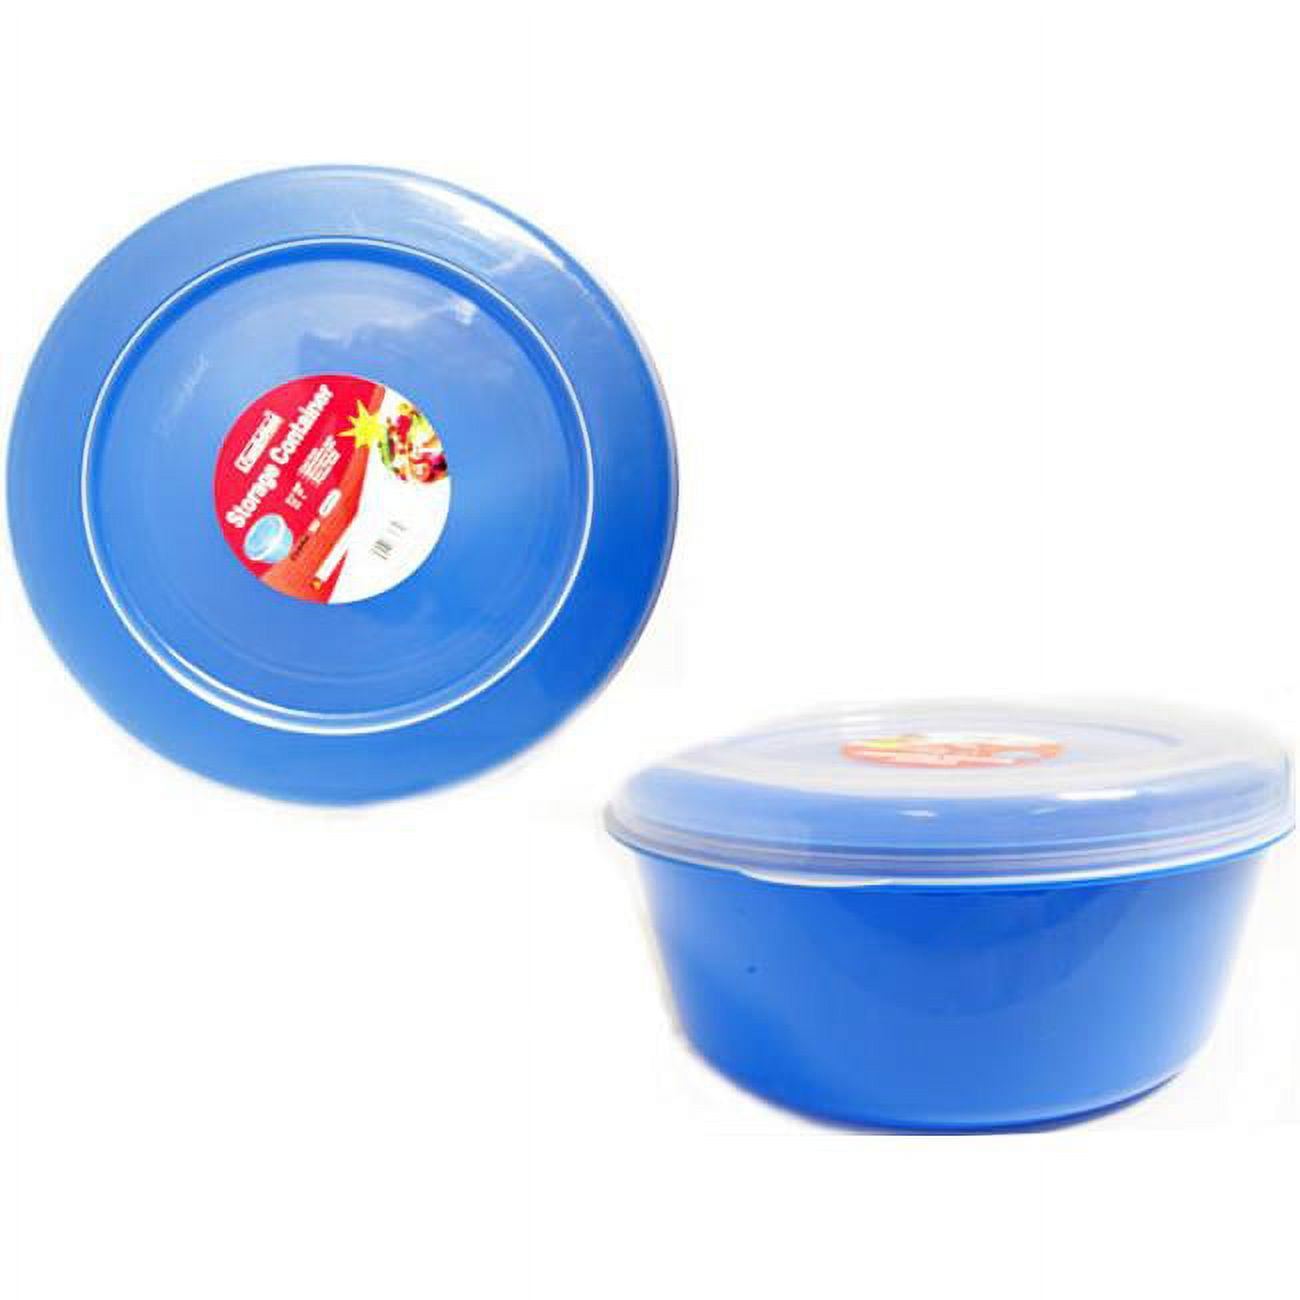 Picture of Family Maid 88234E 9.8 in. dia. x 5.9 in. Food Container 88235, Blue - Pack of 60